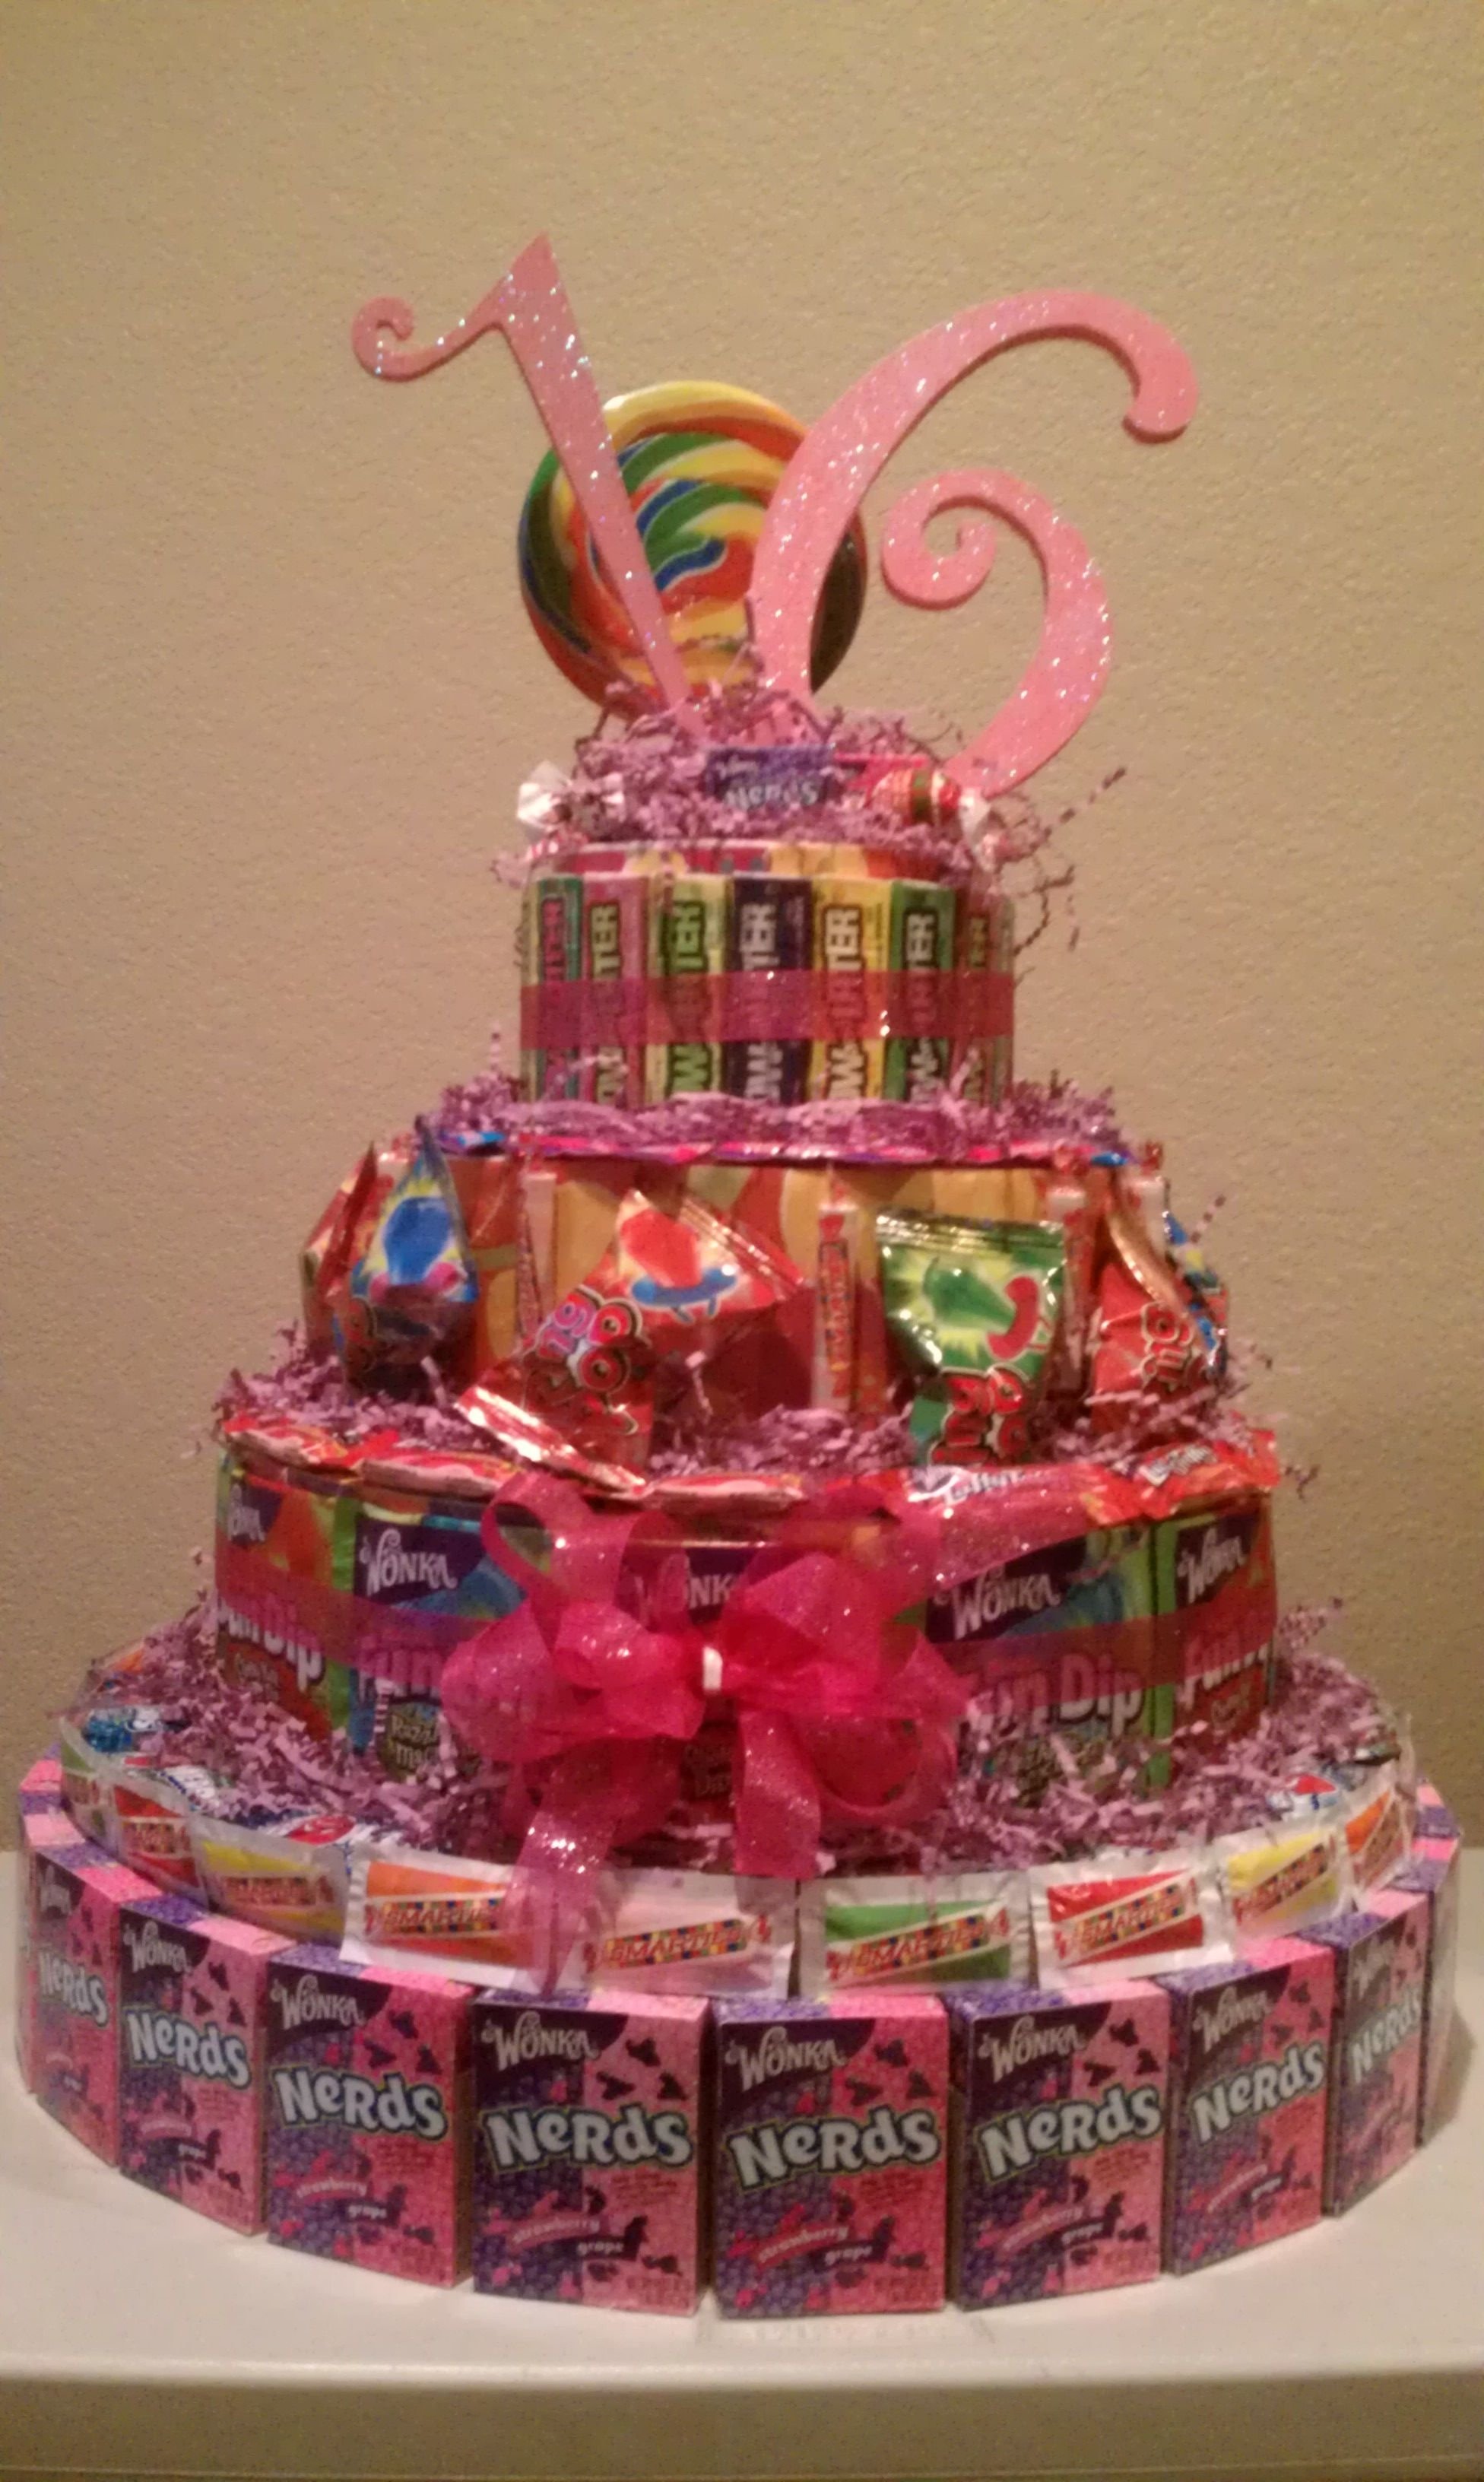 10 Best Sweet 16 Birthday Ideas For A Girl sweet 16 candy cake cool idea stacey party ideas pinterest 1 2022